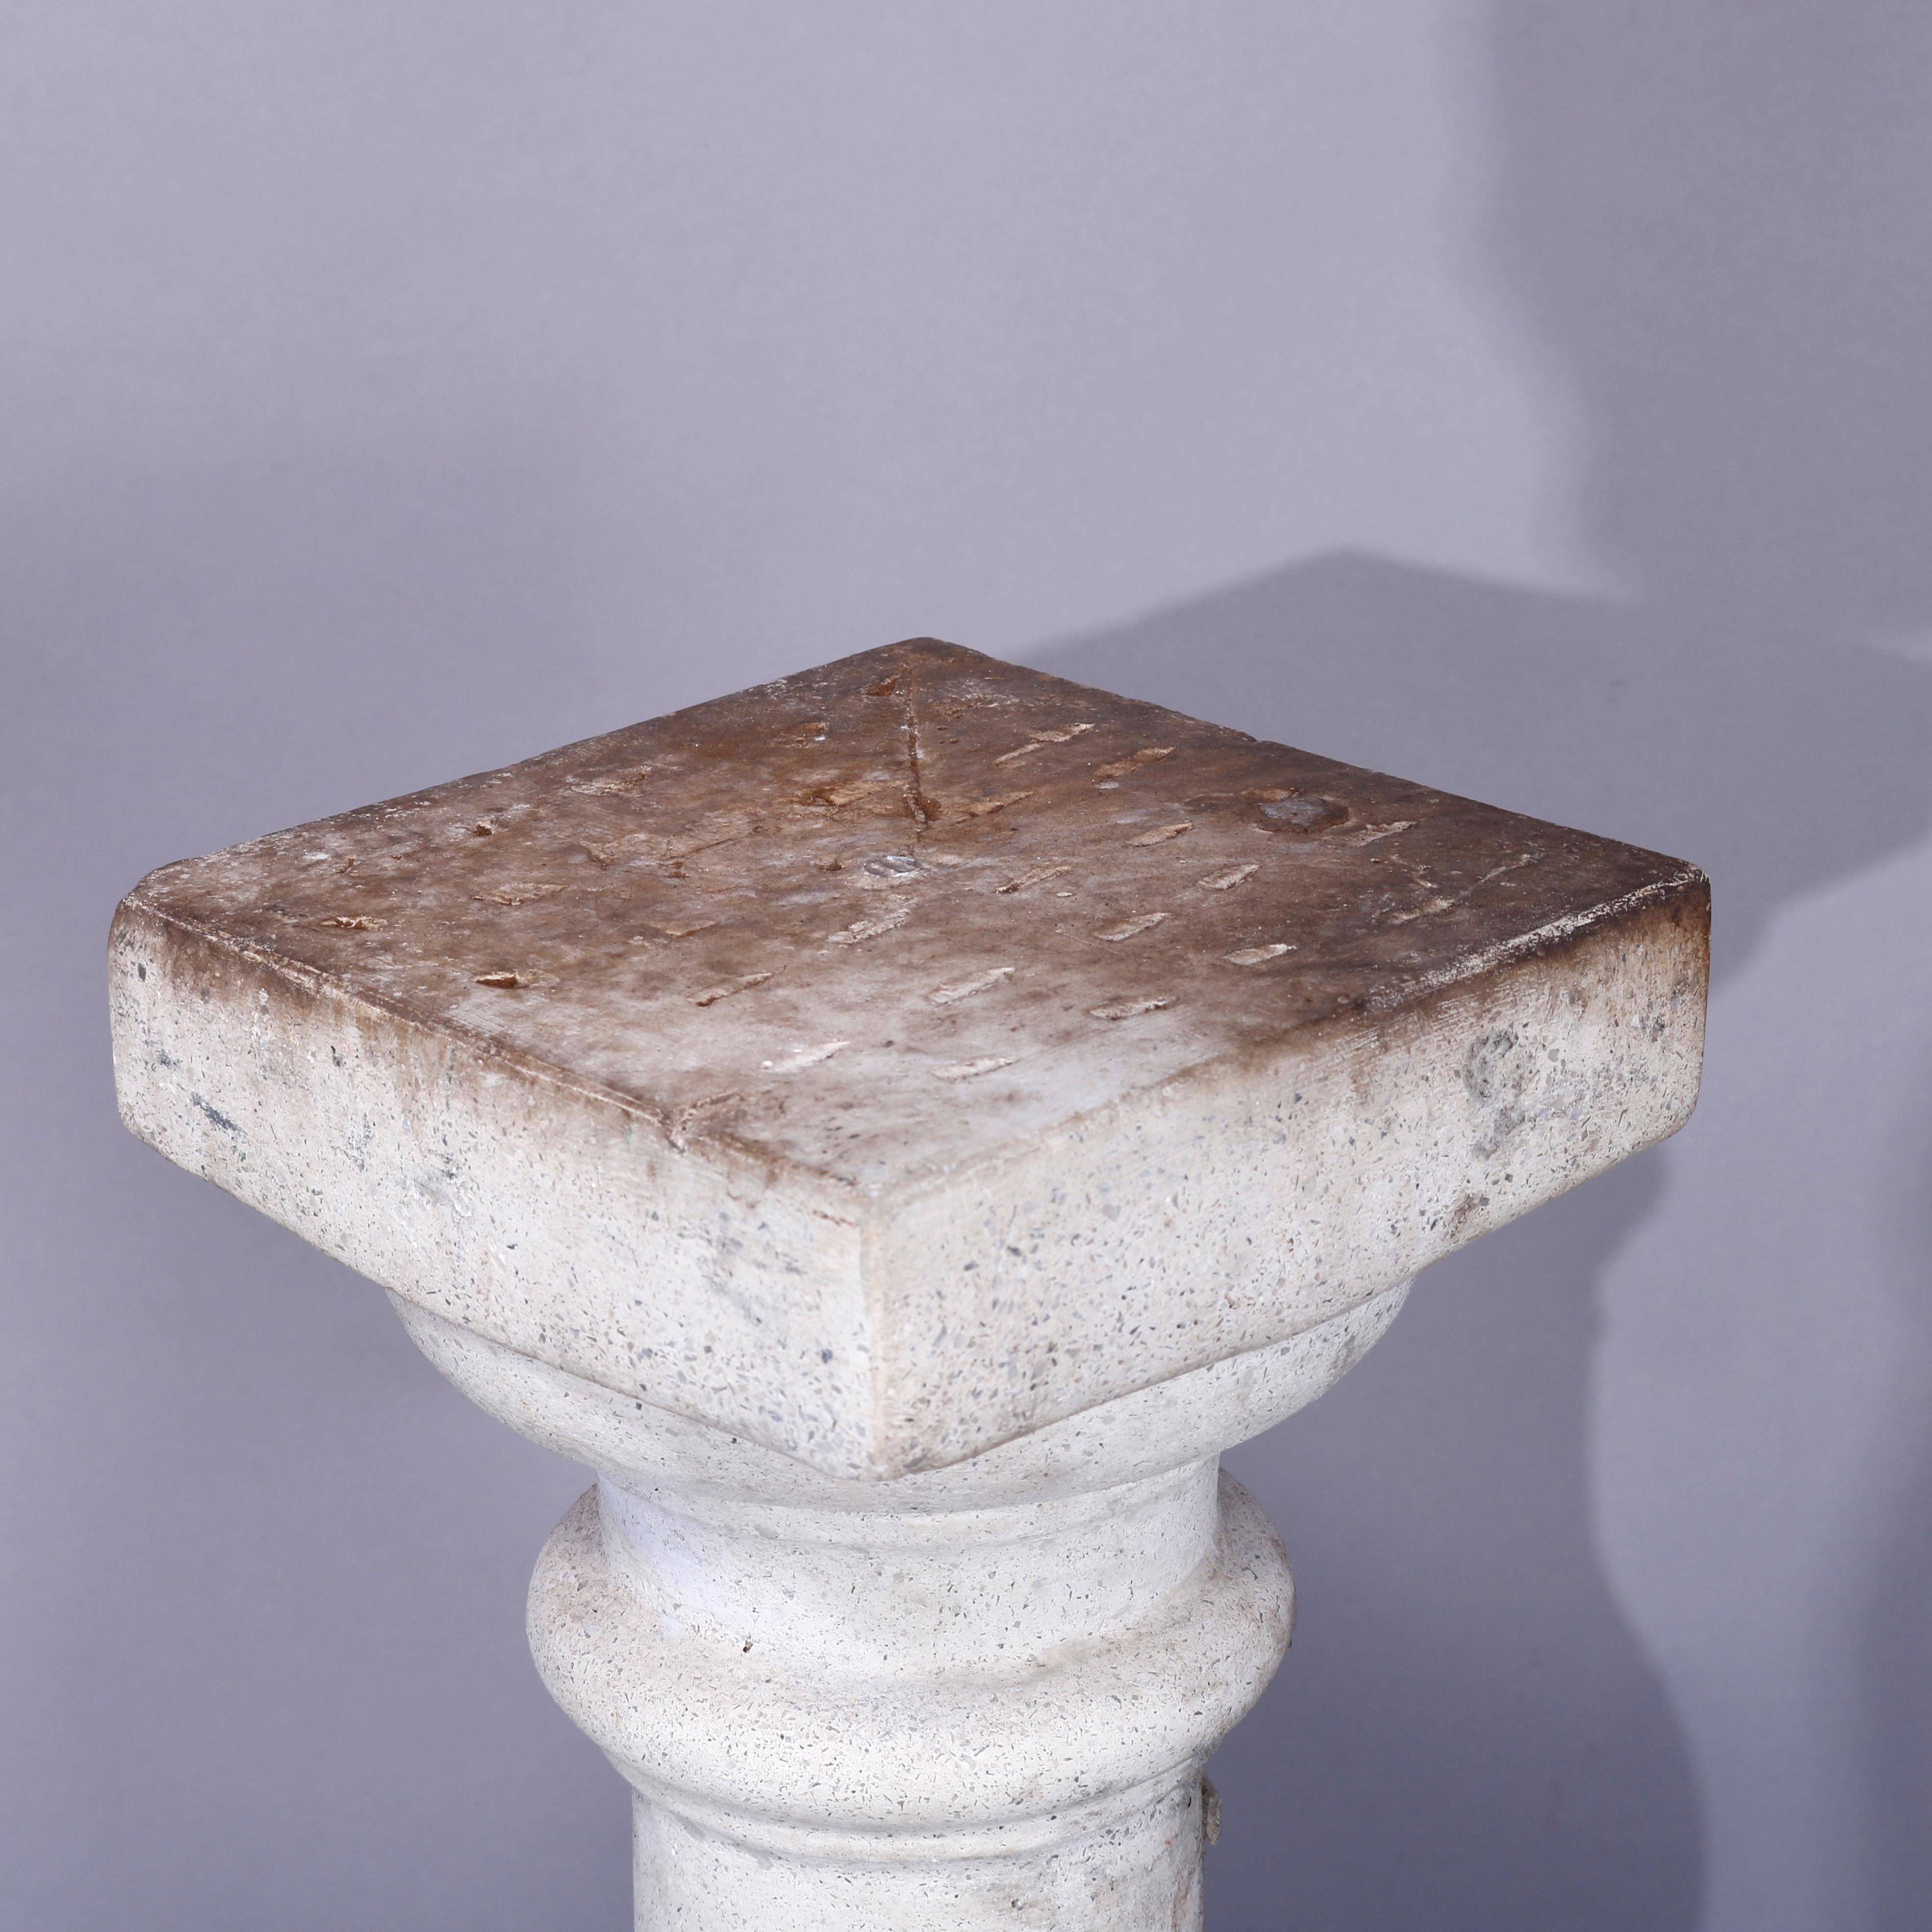 20th Century Classical Cast Hard Stone Balustrade Sculpture or Plant Display Pedestal 20th C For Sale